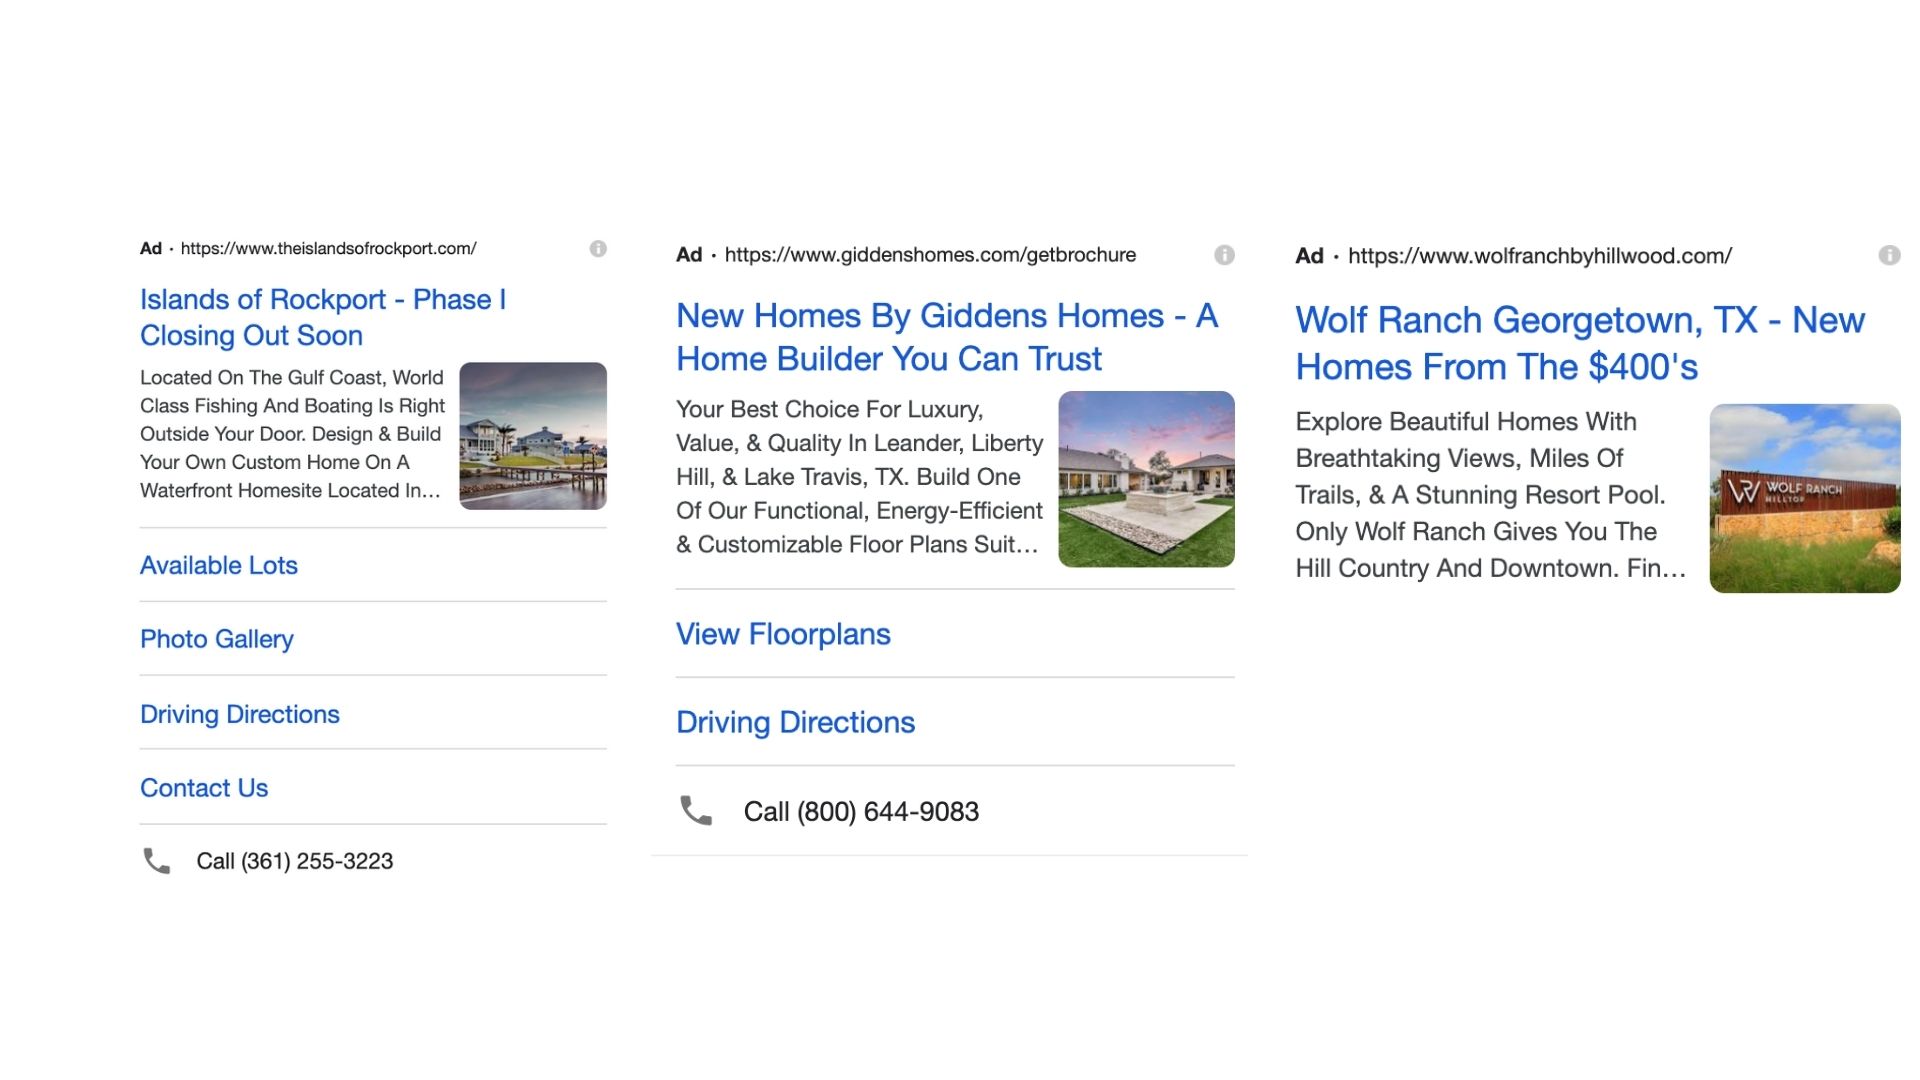 Google Ads Image Extensions for Homebuilders